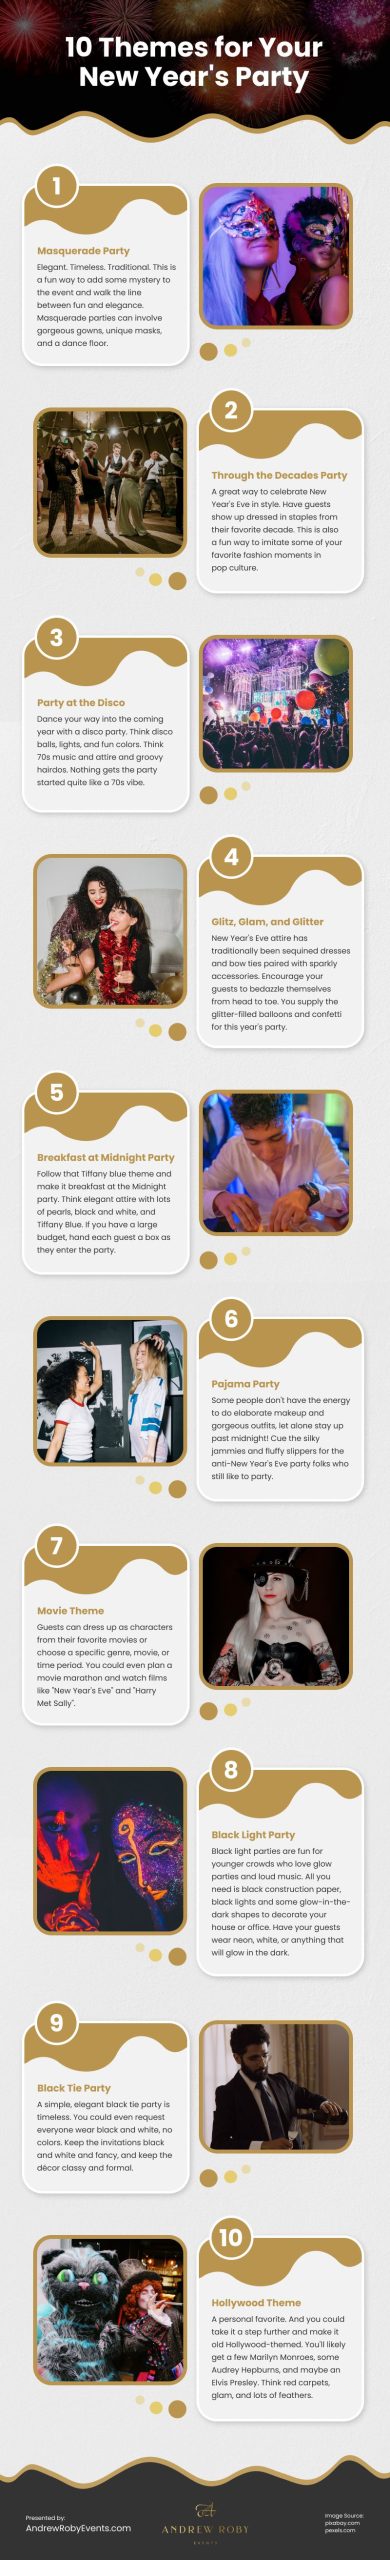 10 Themes for Your New Year’s Party Infographic